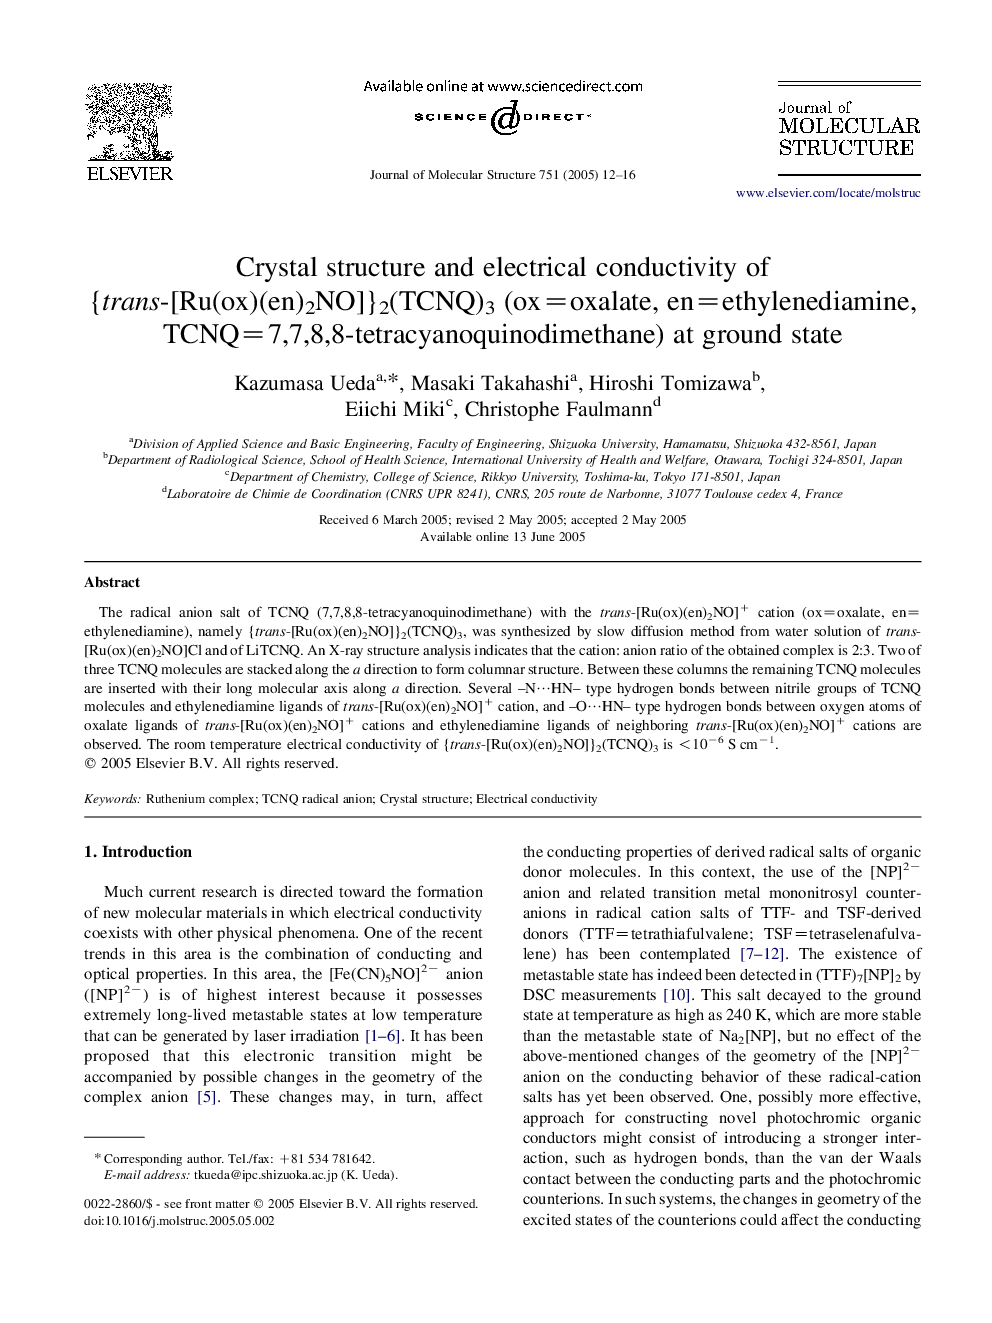 Crystal structure and electrical conductivity of {trans-[Ru(ox)(en)2NO]}2(TCNQ)3 (ox=oxalate, en=ethylenediamine, TCNQ=7,7,8,8-tetracyanoquinodimethane) at ground state